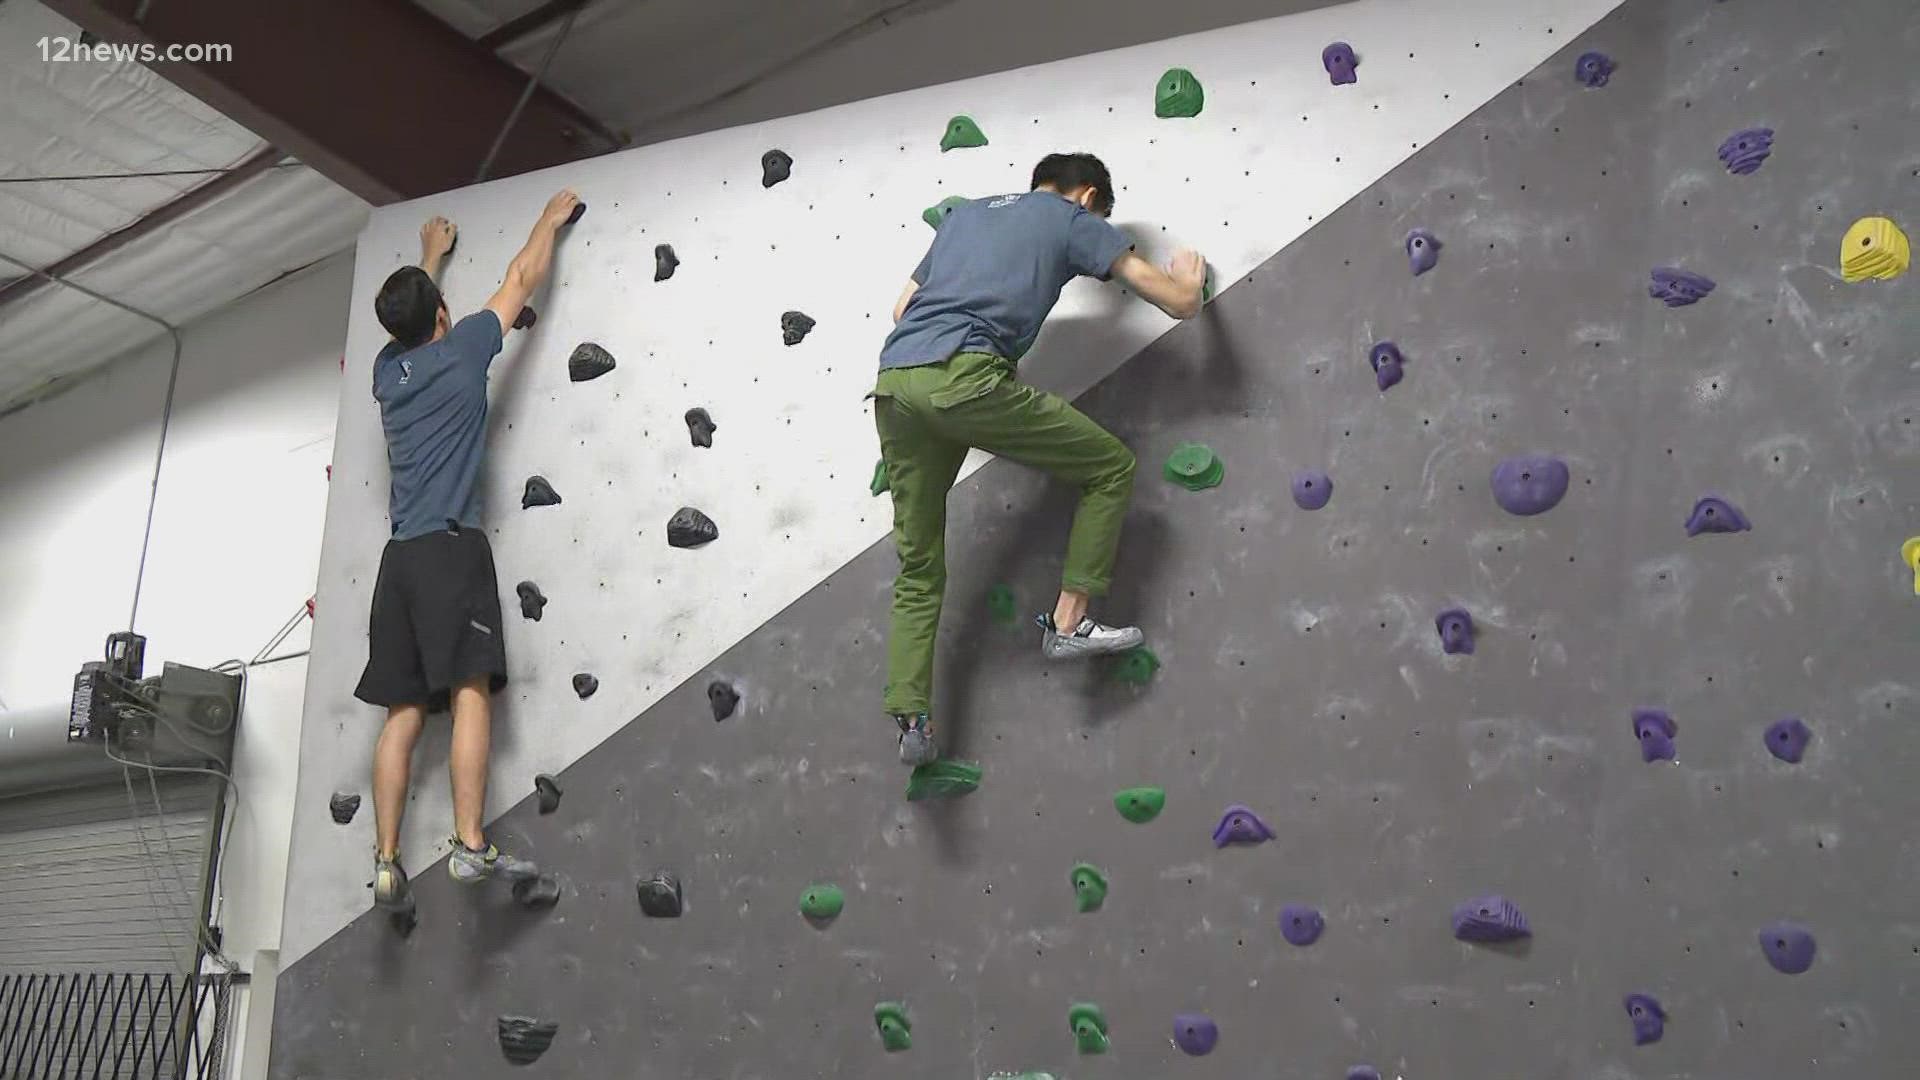 Sport climbing is making its debut as an Olympic sport in Tokyo. Jess Winters stops by a Valley gym to see what it's all about.